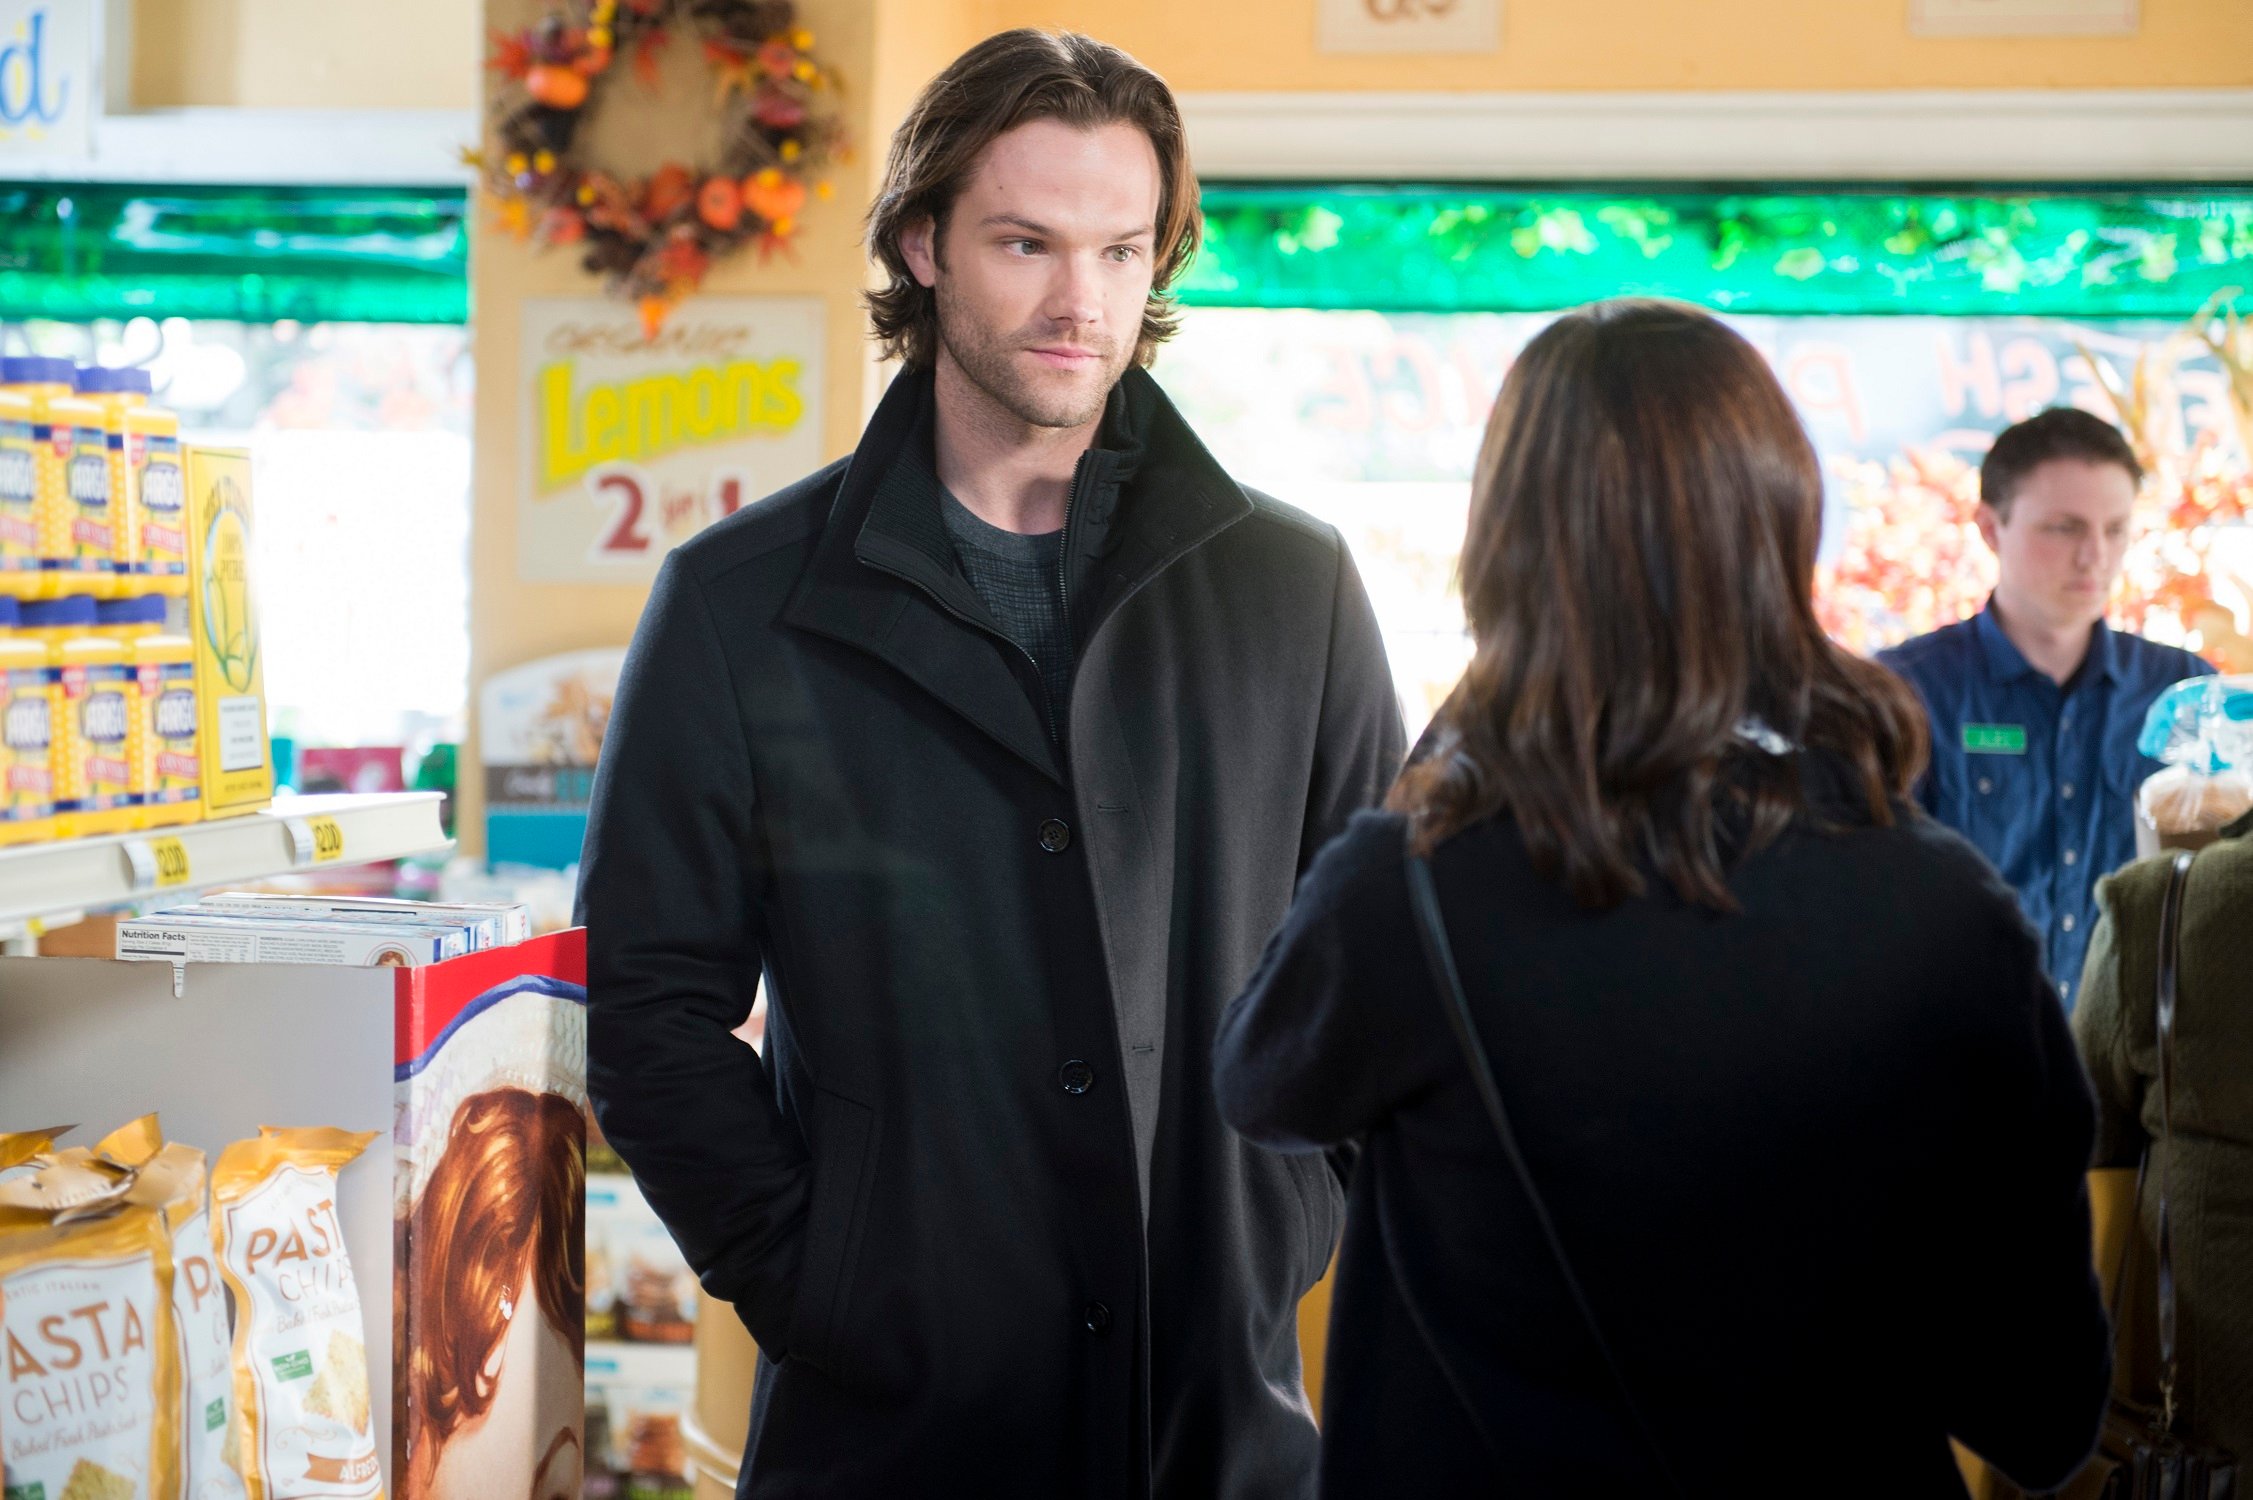 Dean Forrester and Rory Gilmore run into each other in Doose's Market in 'Gilmore Girls: A Year in the Life'